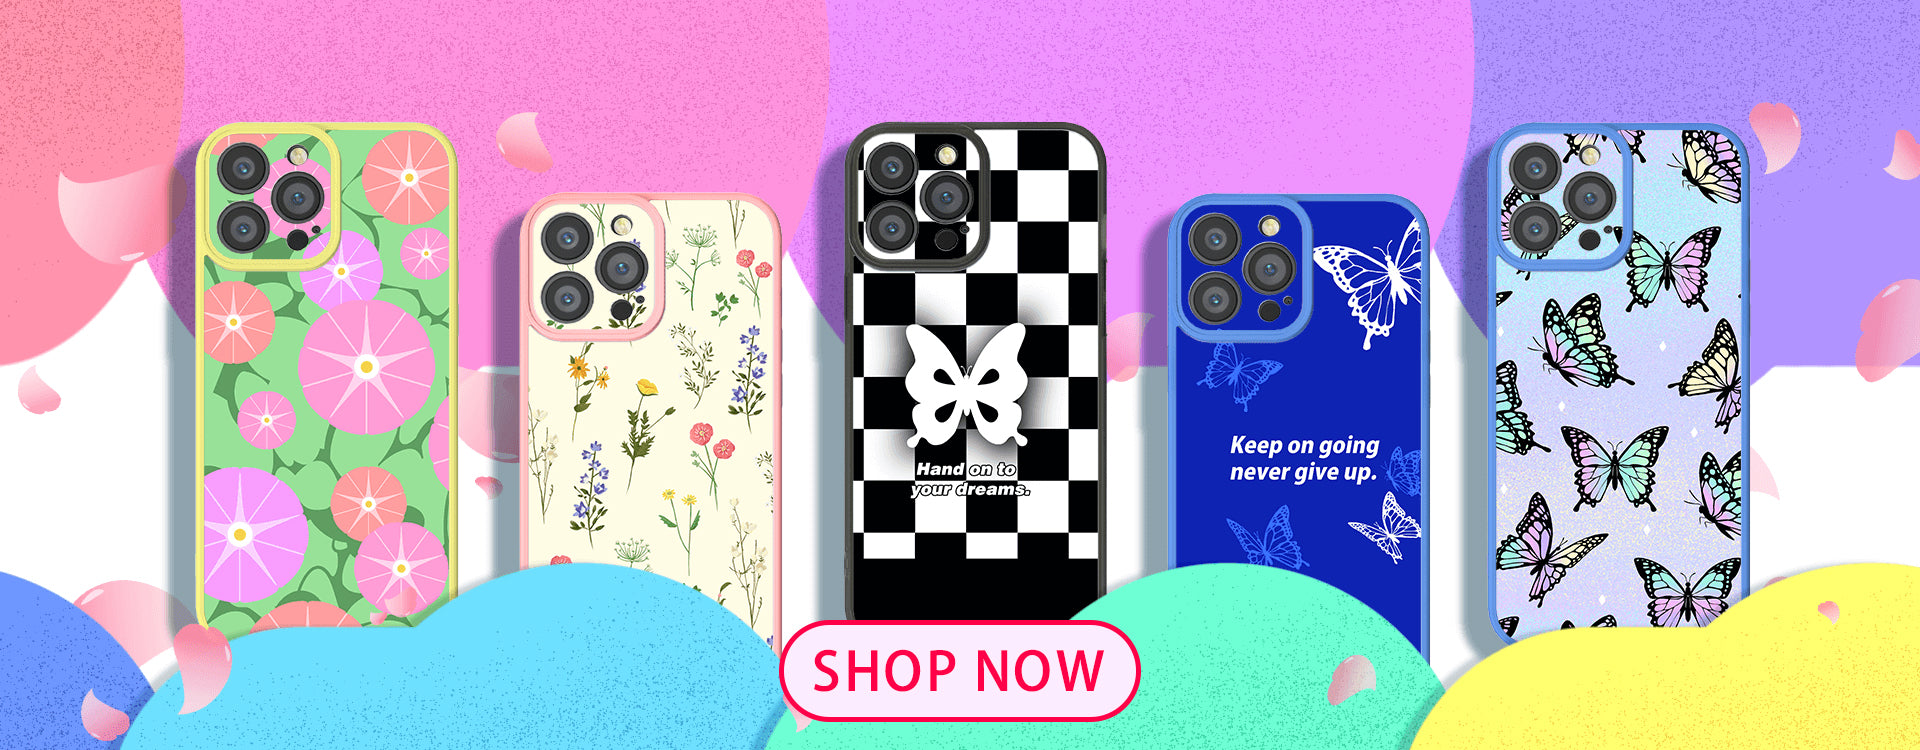 Black And White Plaid Print Phone Case for Matching Tops